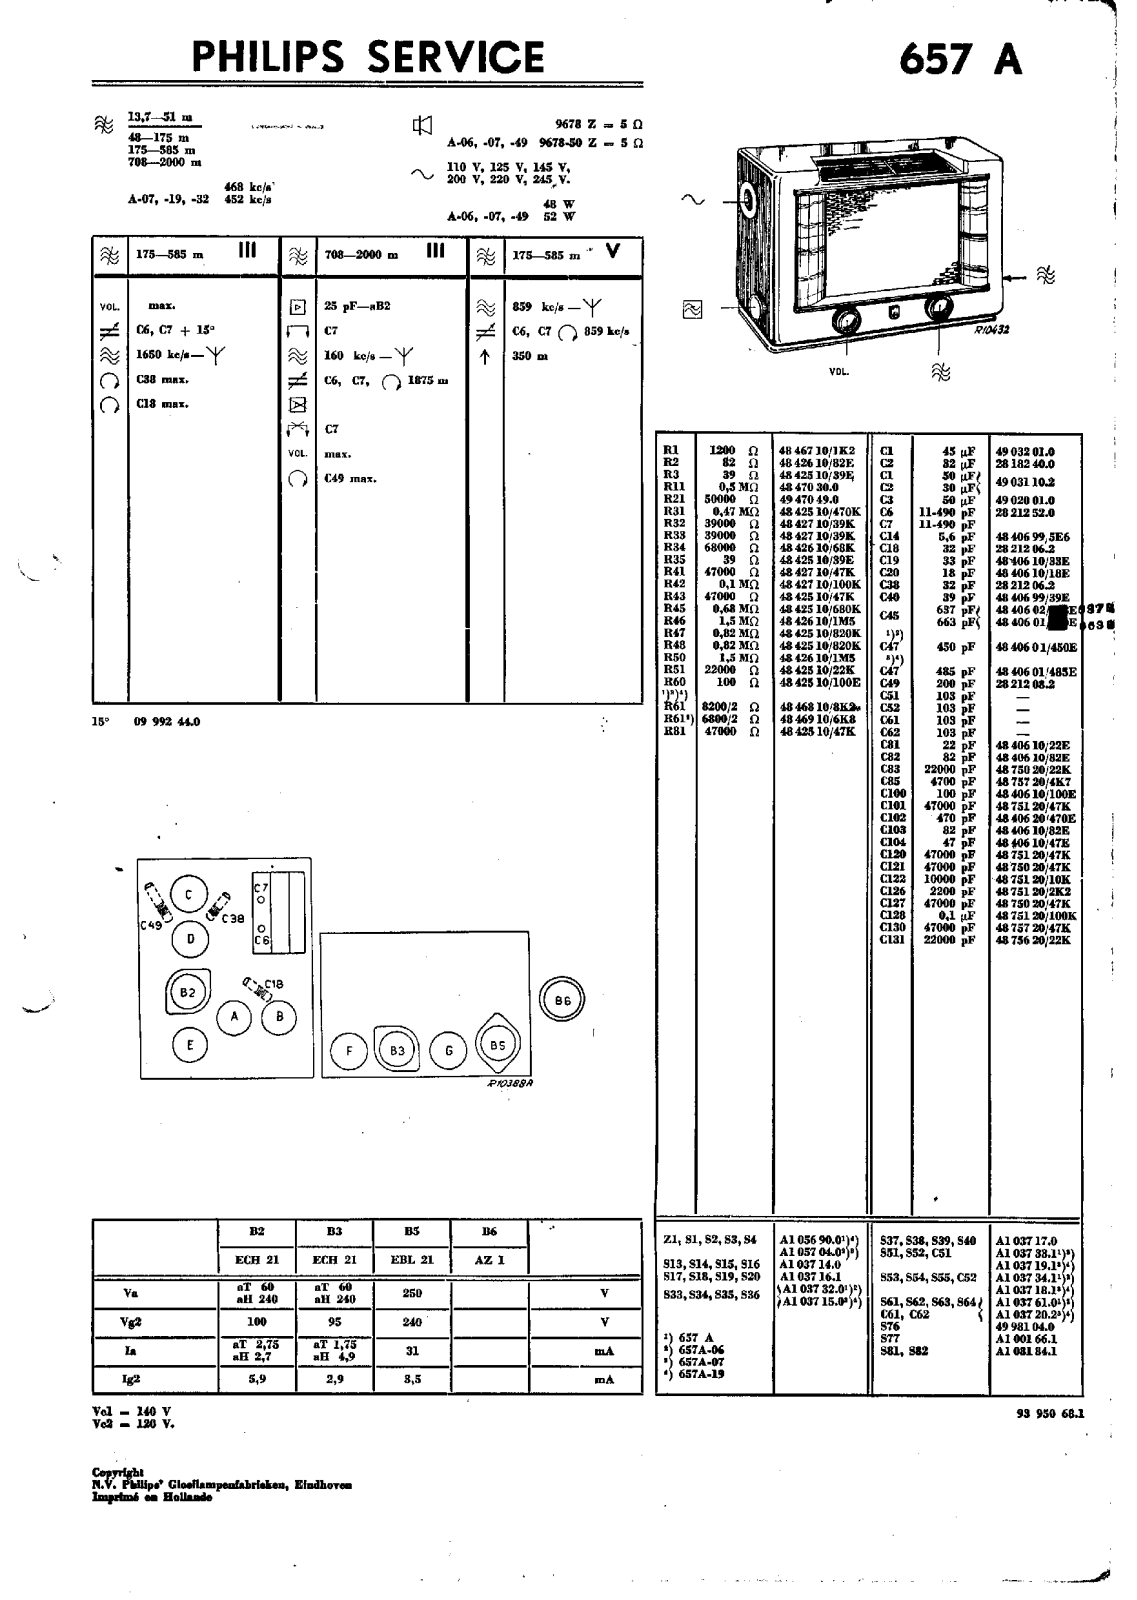 Philips 657-A Service Manual